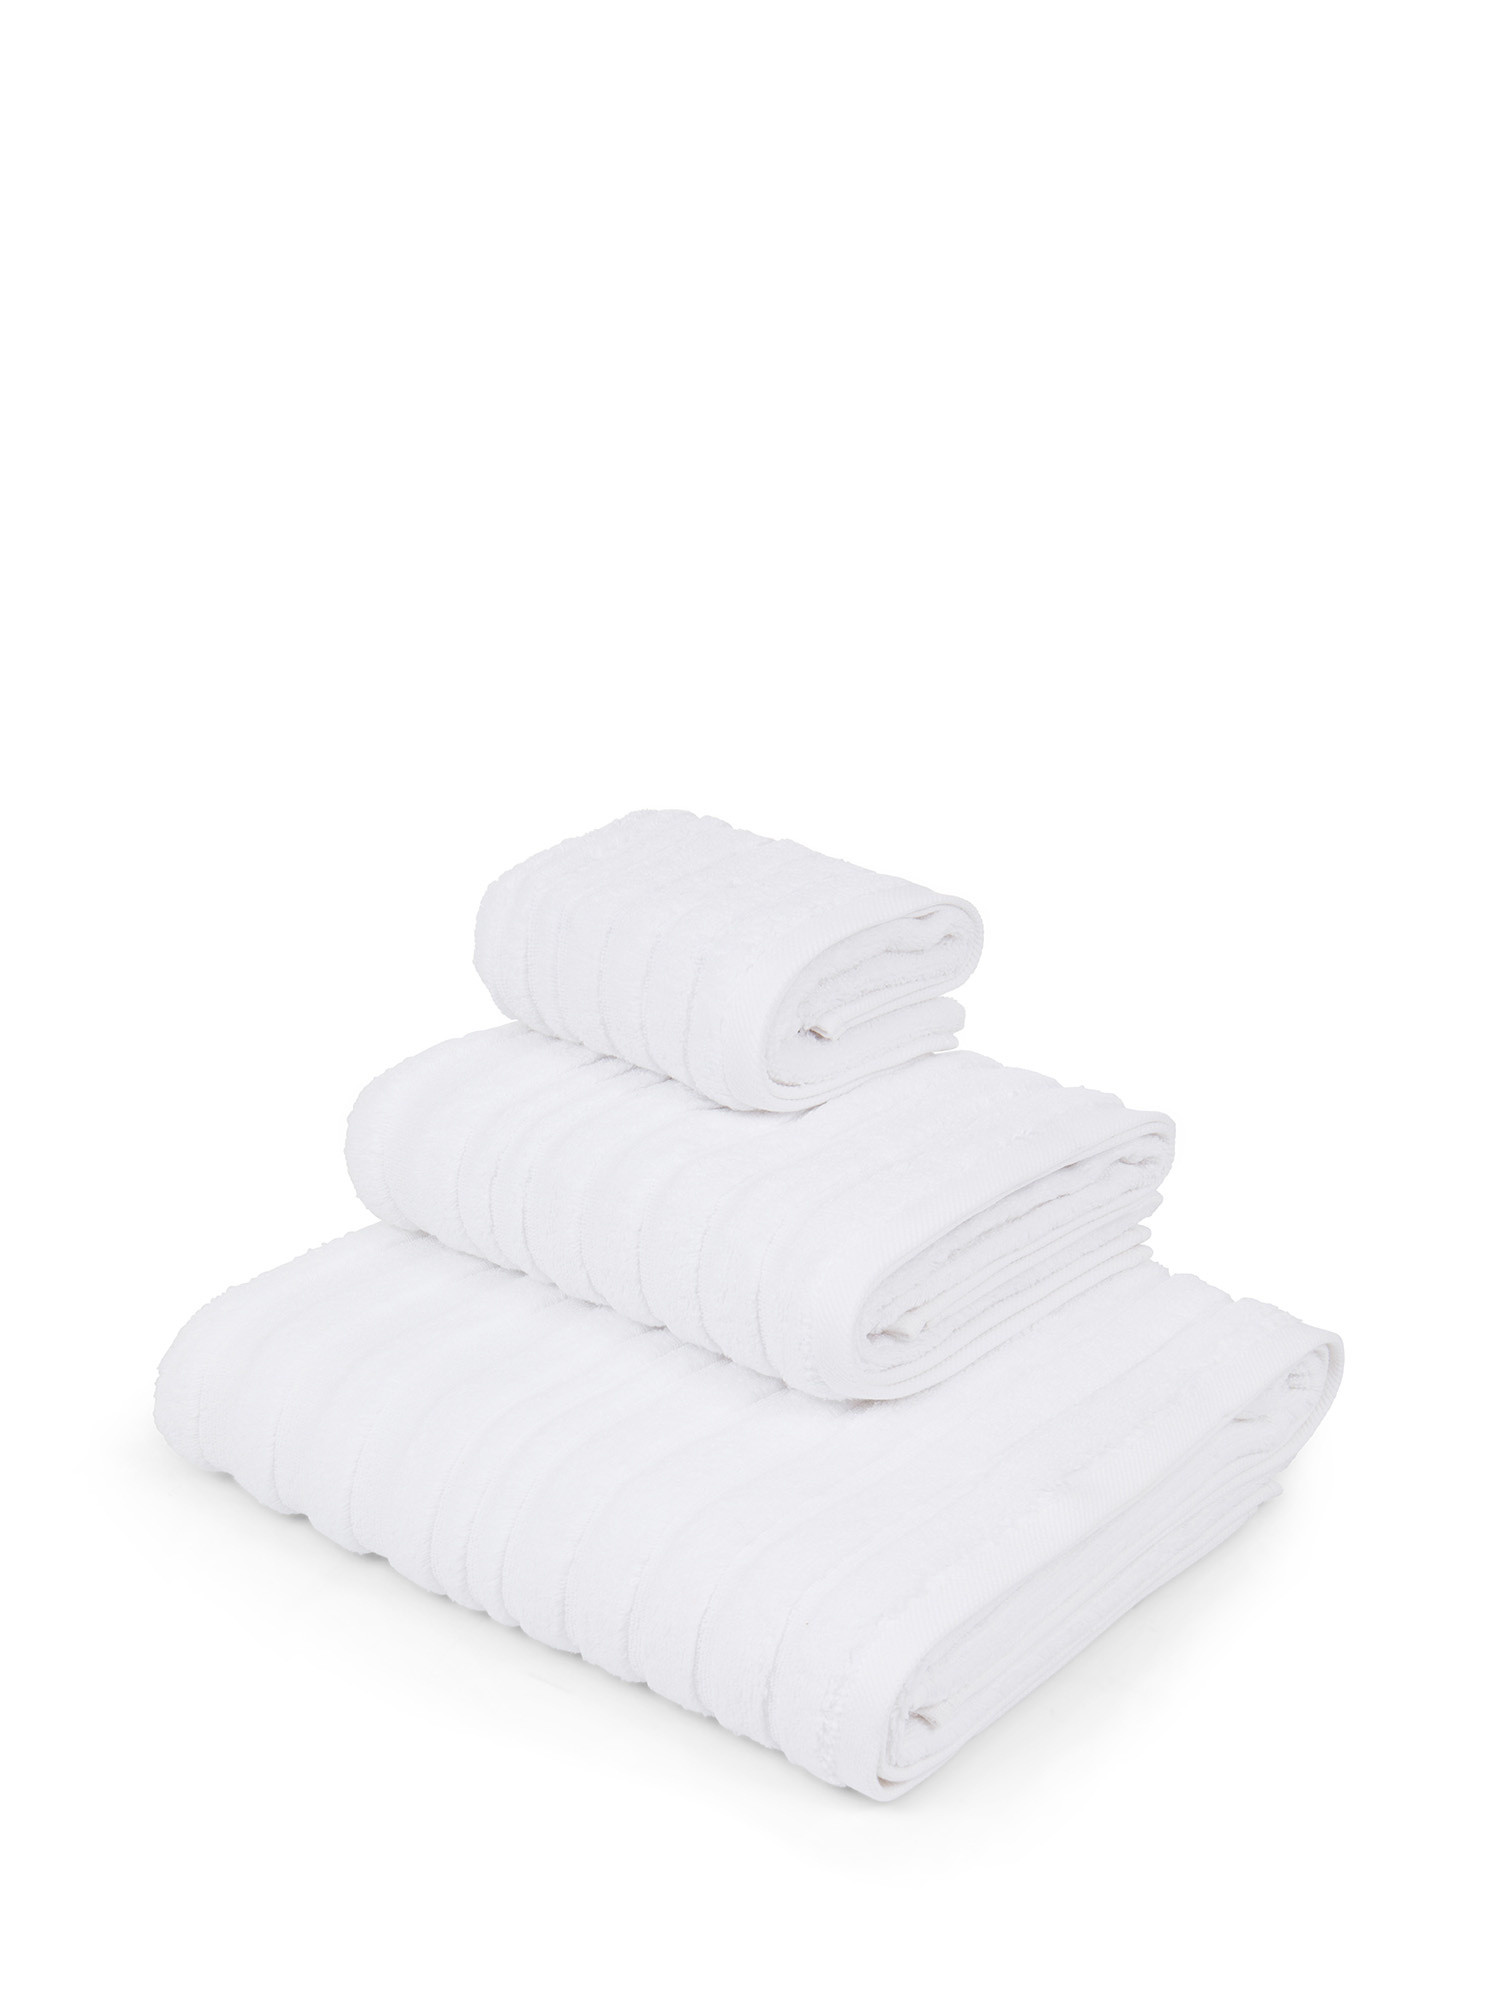 Cotton terry towel with embossed stripes, White, large image number 0